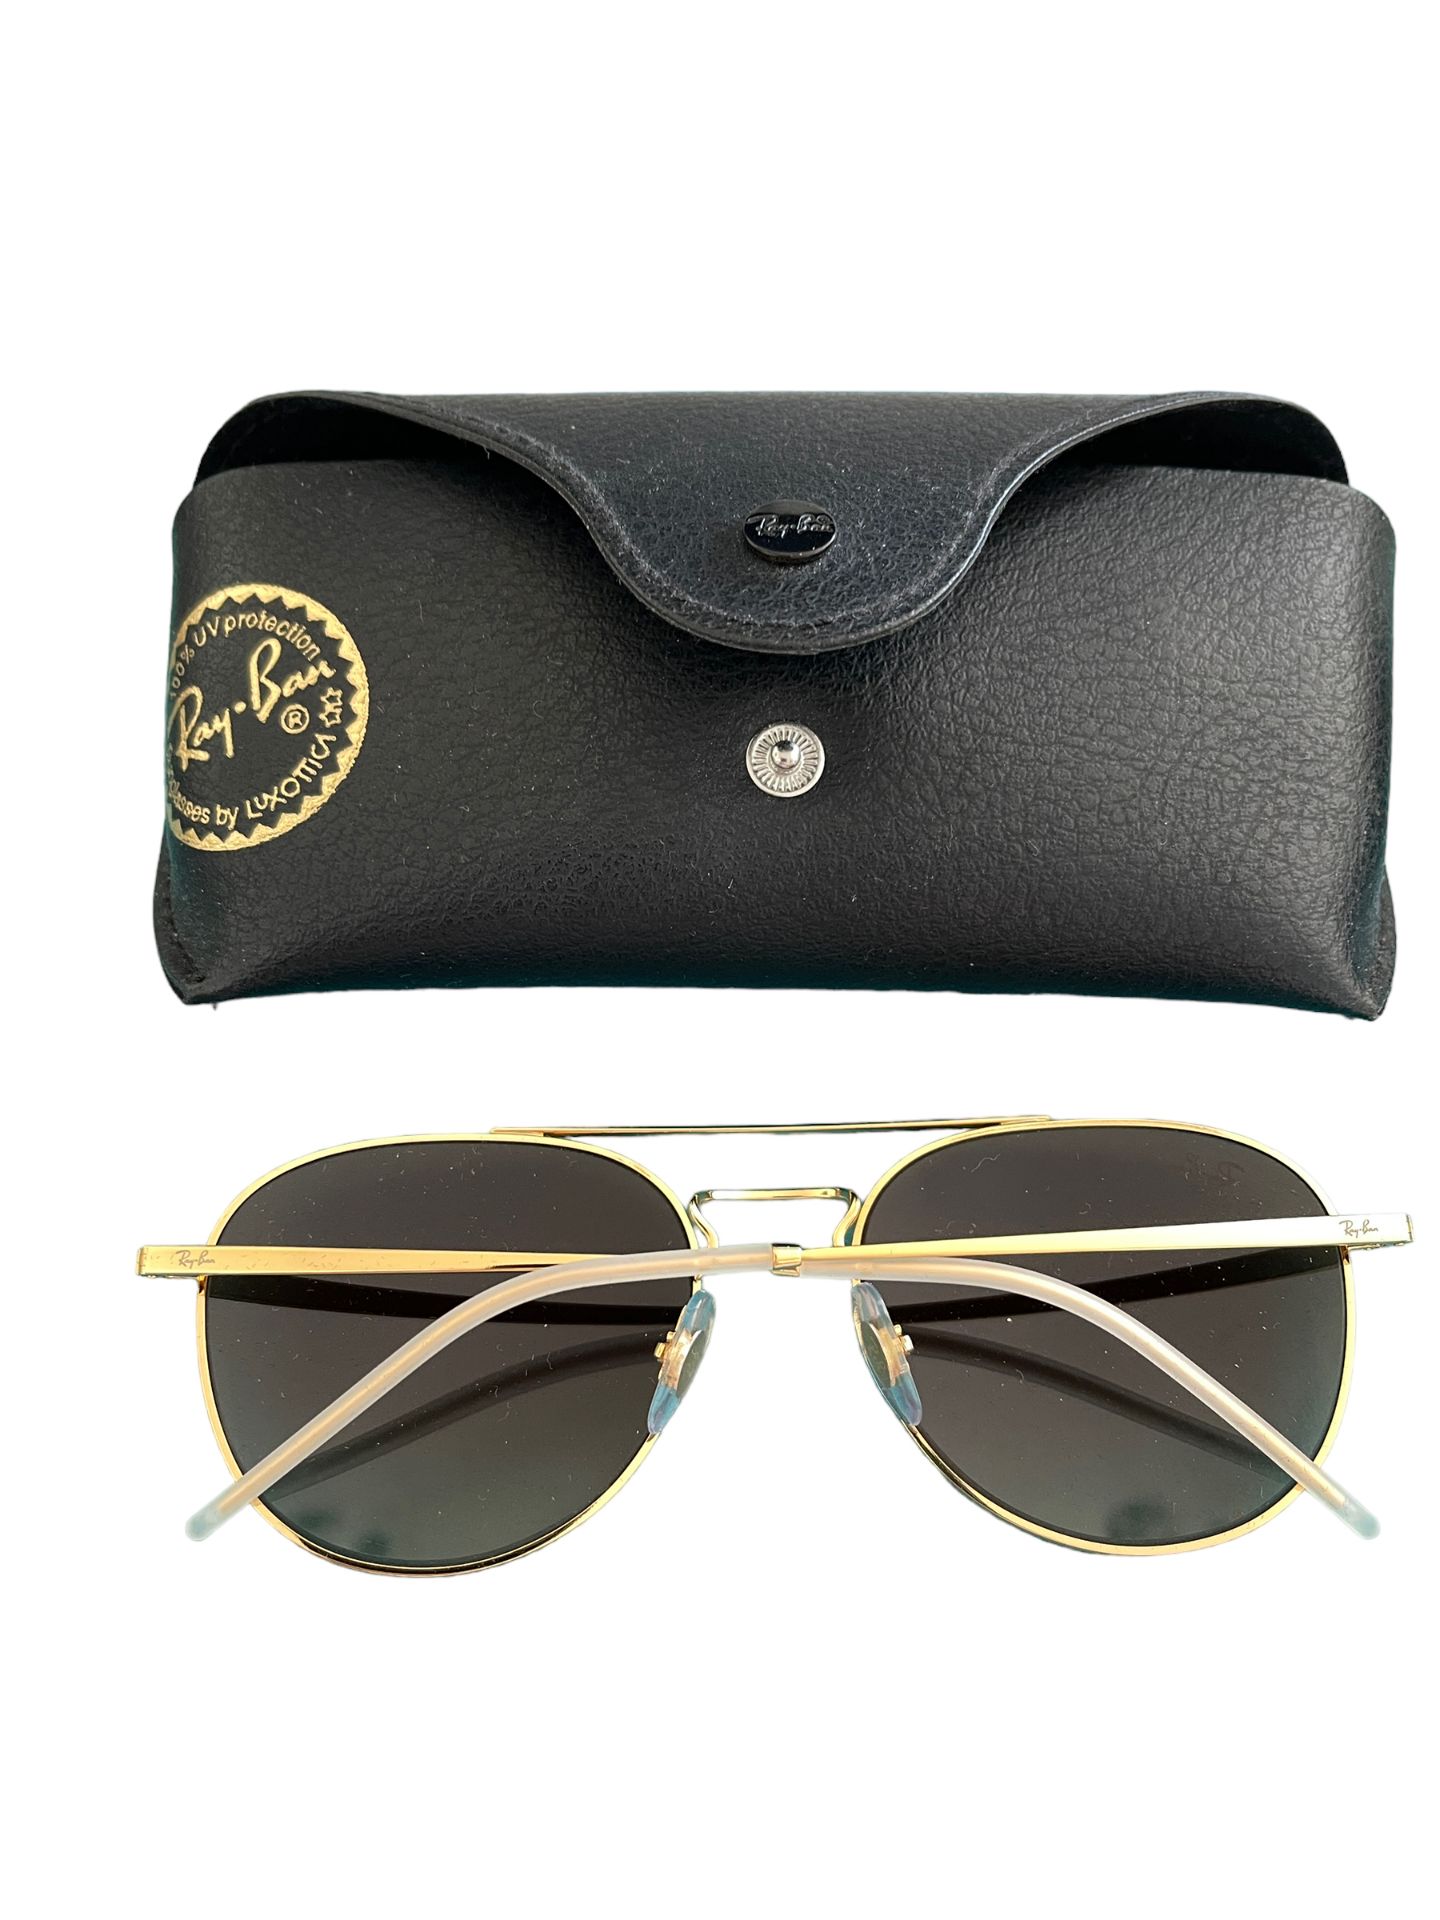 Lost property Ray Ban Sunglasses - Image 2 of 3